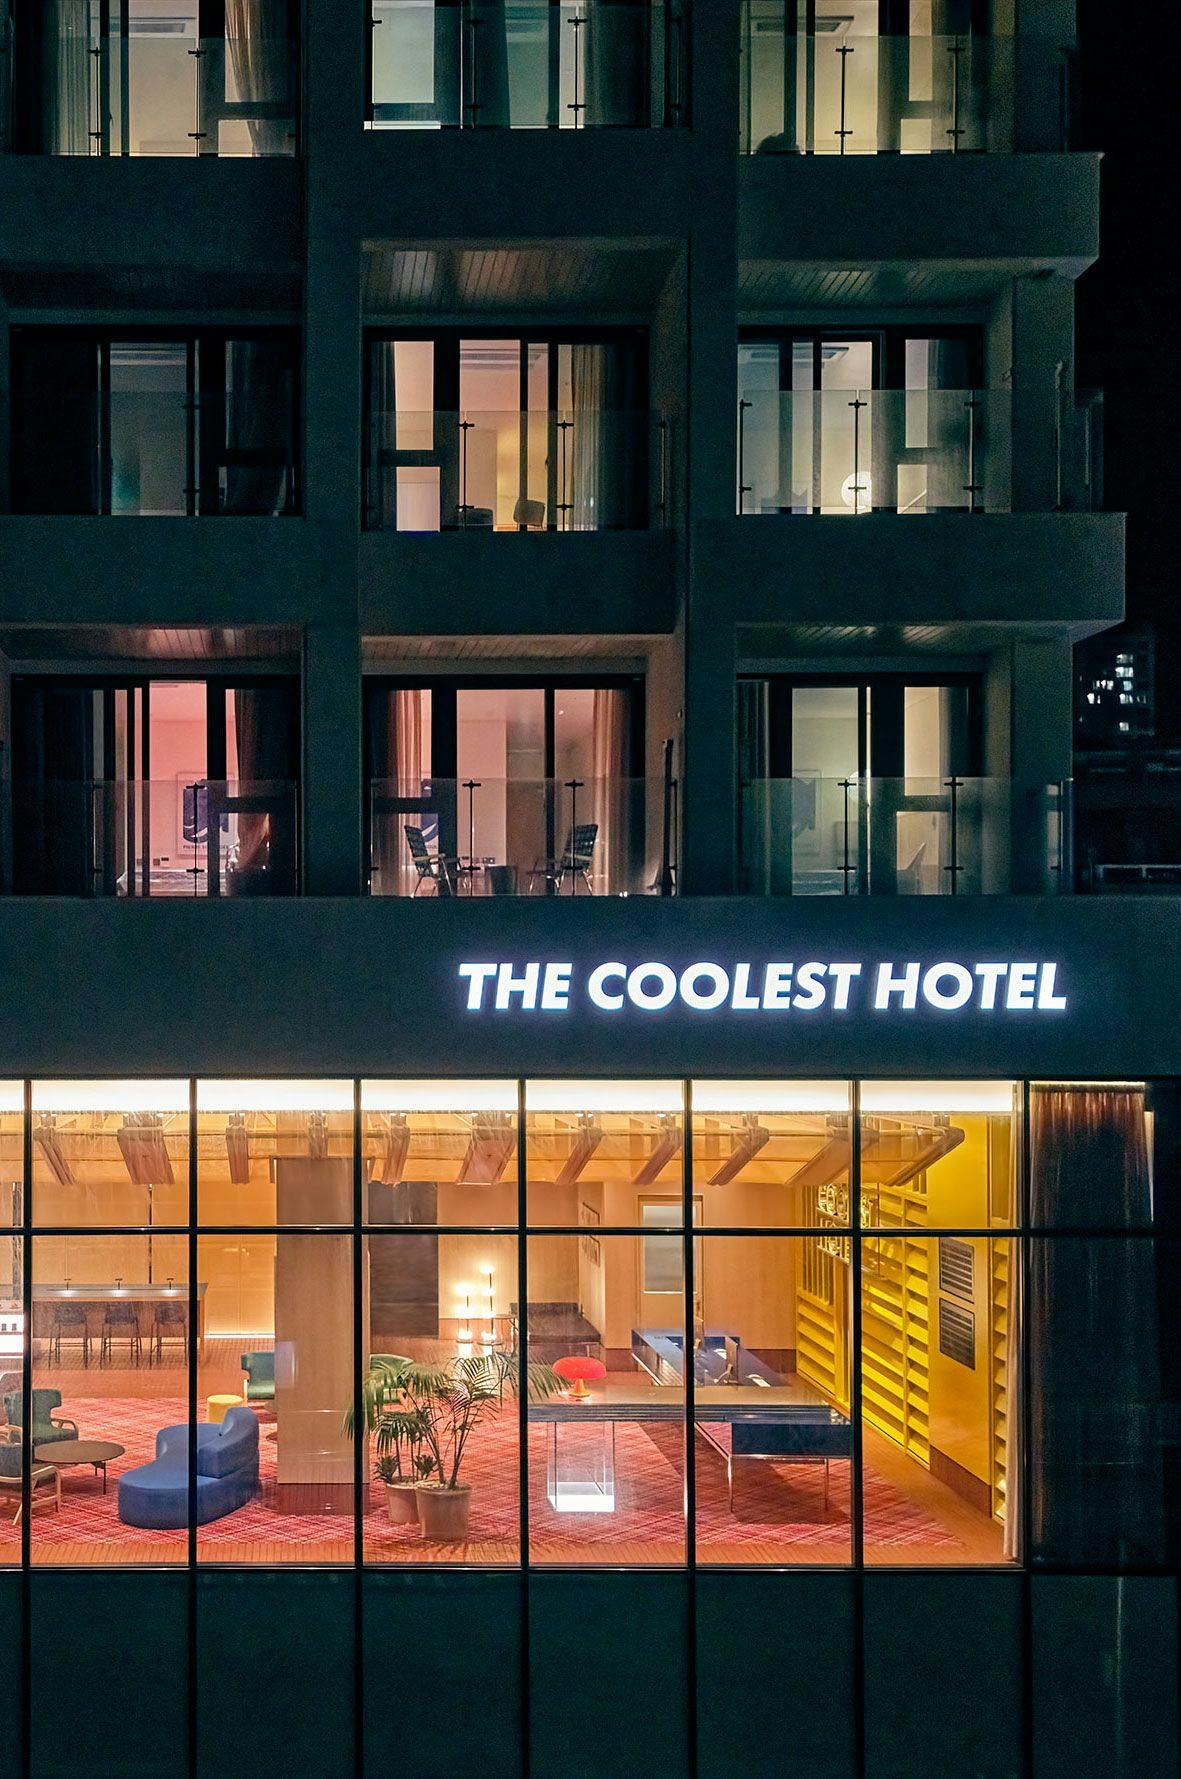 THE COOLEST HOTEL